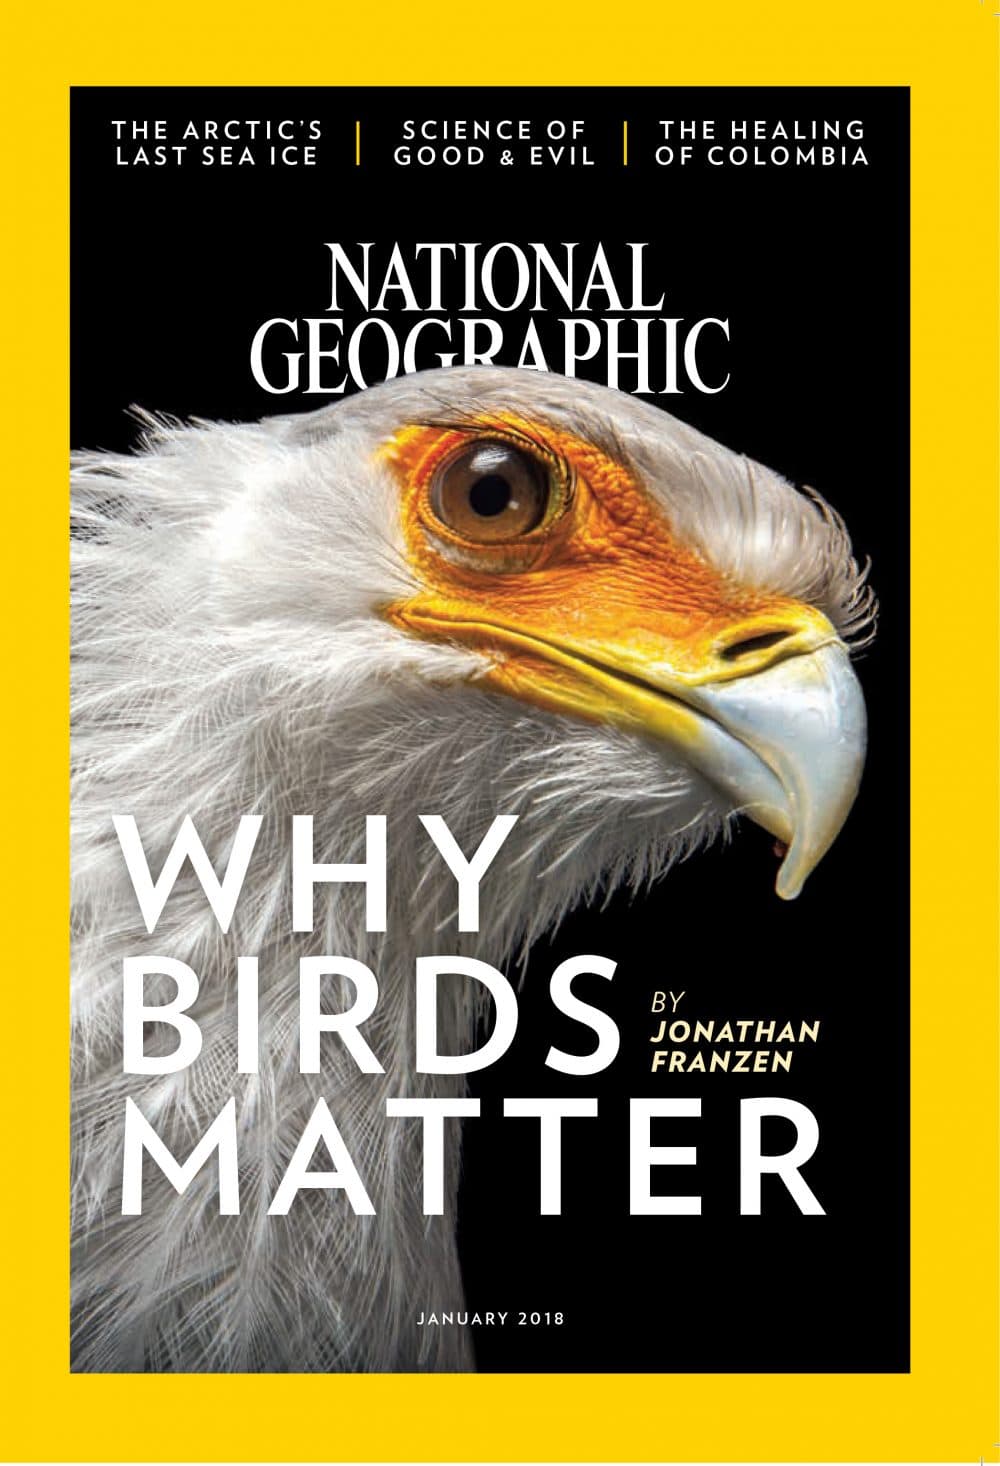 The cover of National Geographic magazine.